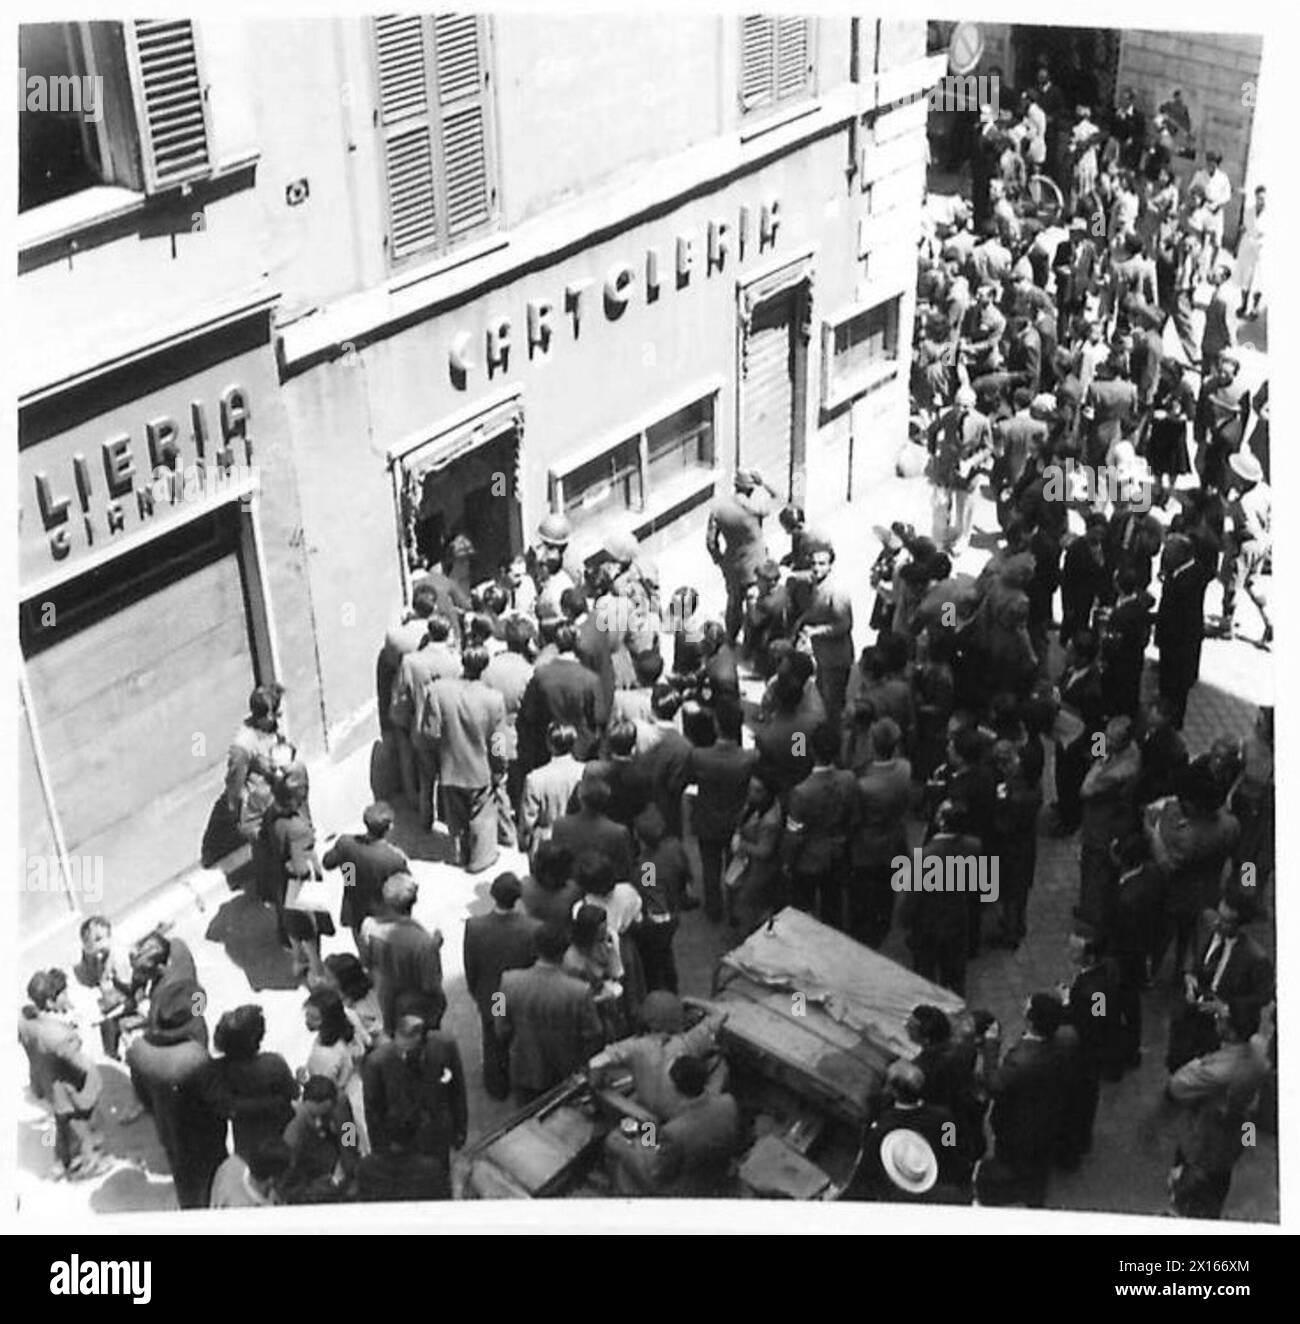 THE BRITISH ARMY IN NORTH AFRICA, SICILY, ITALY, THE BALKANS AND AUSTRIA 1942-1946 - A German-owned stationers was broken open and looted by a mob, until an armed party from the P.L.I. Italian Liberal Party arrived to stop the looting British Army Stock Photo